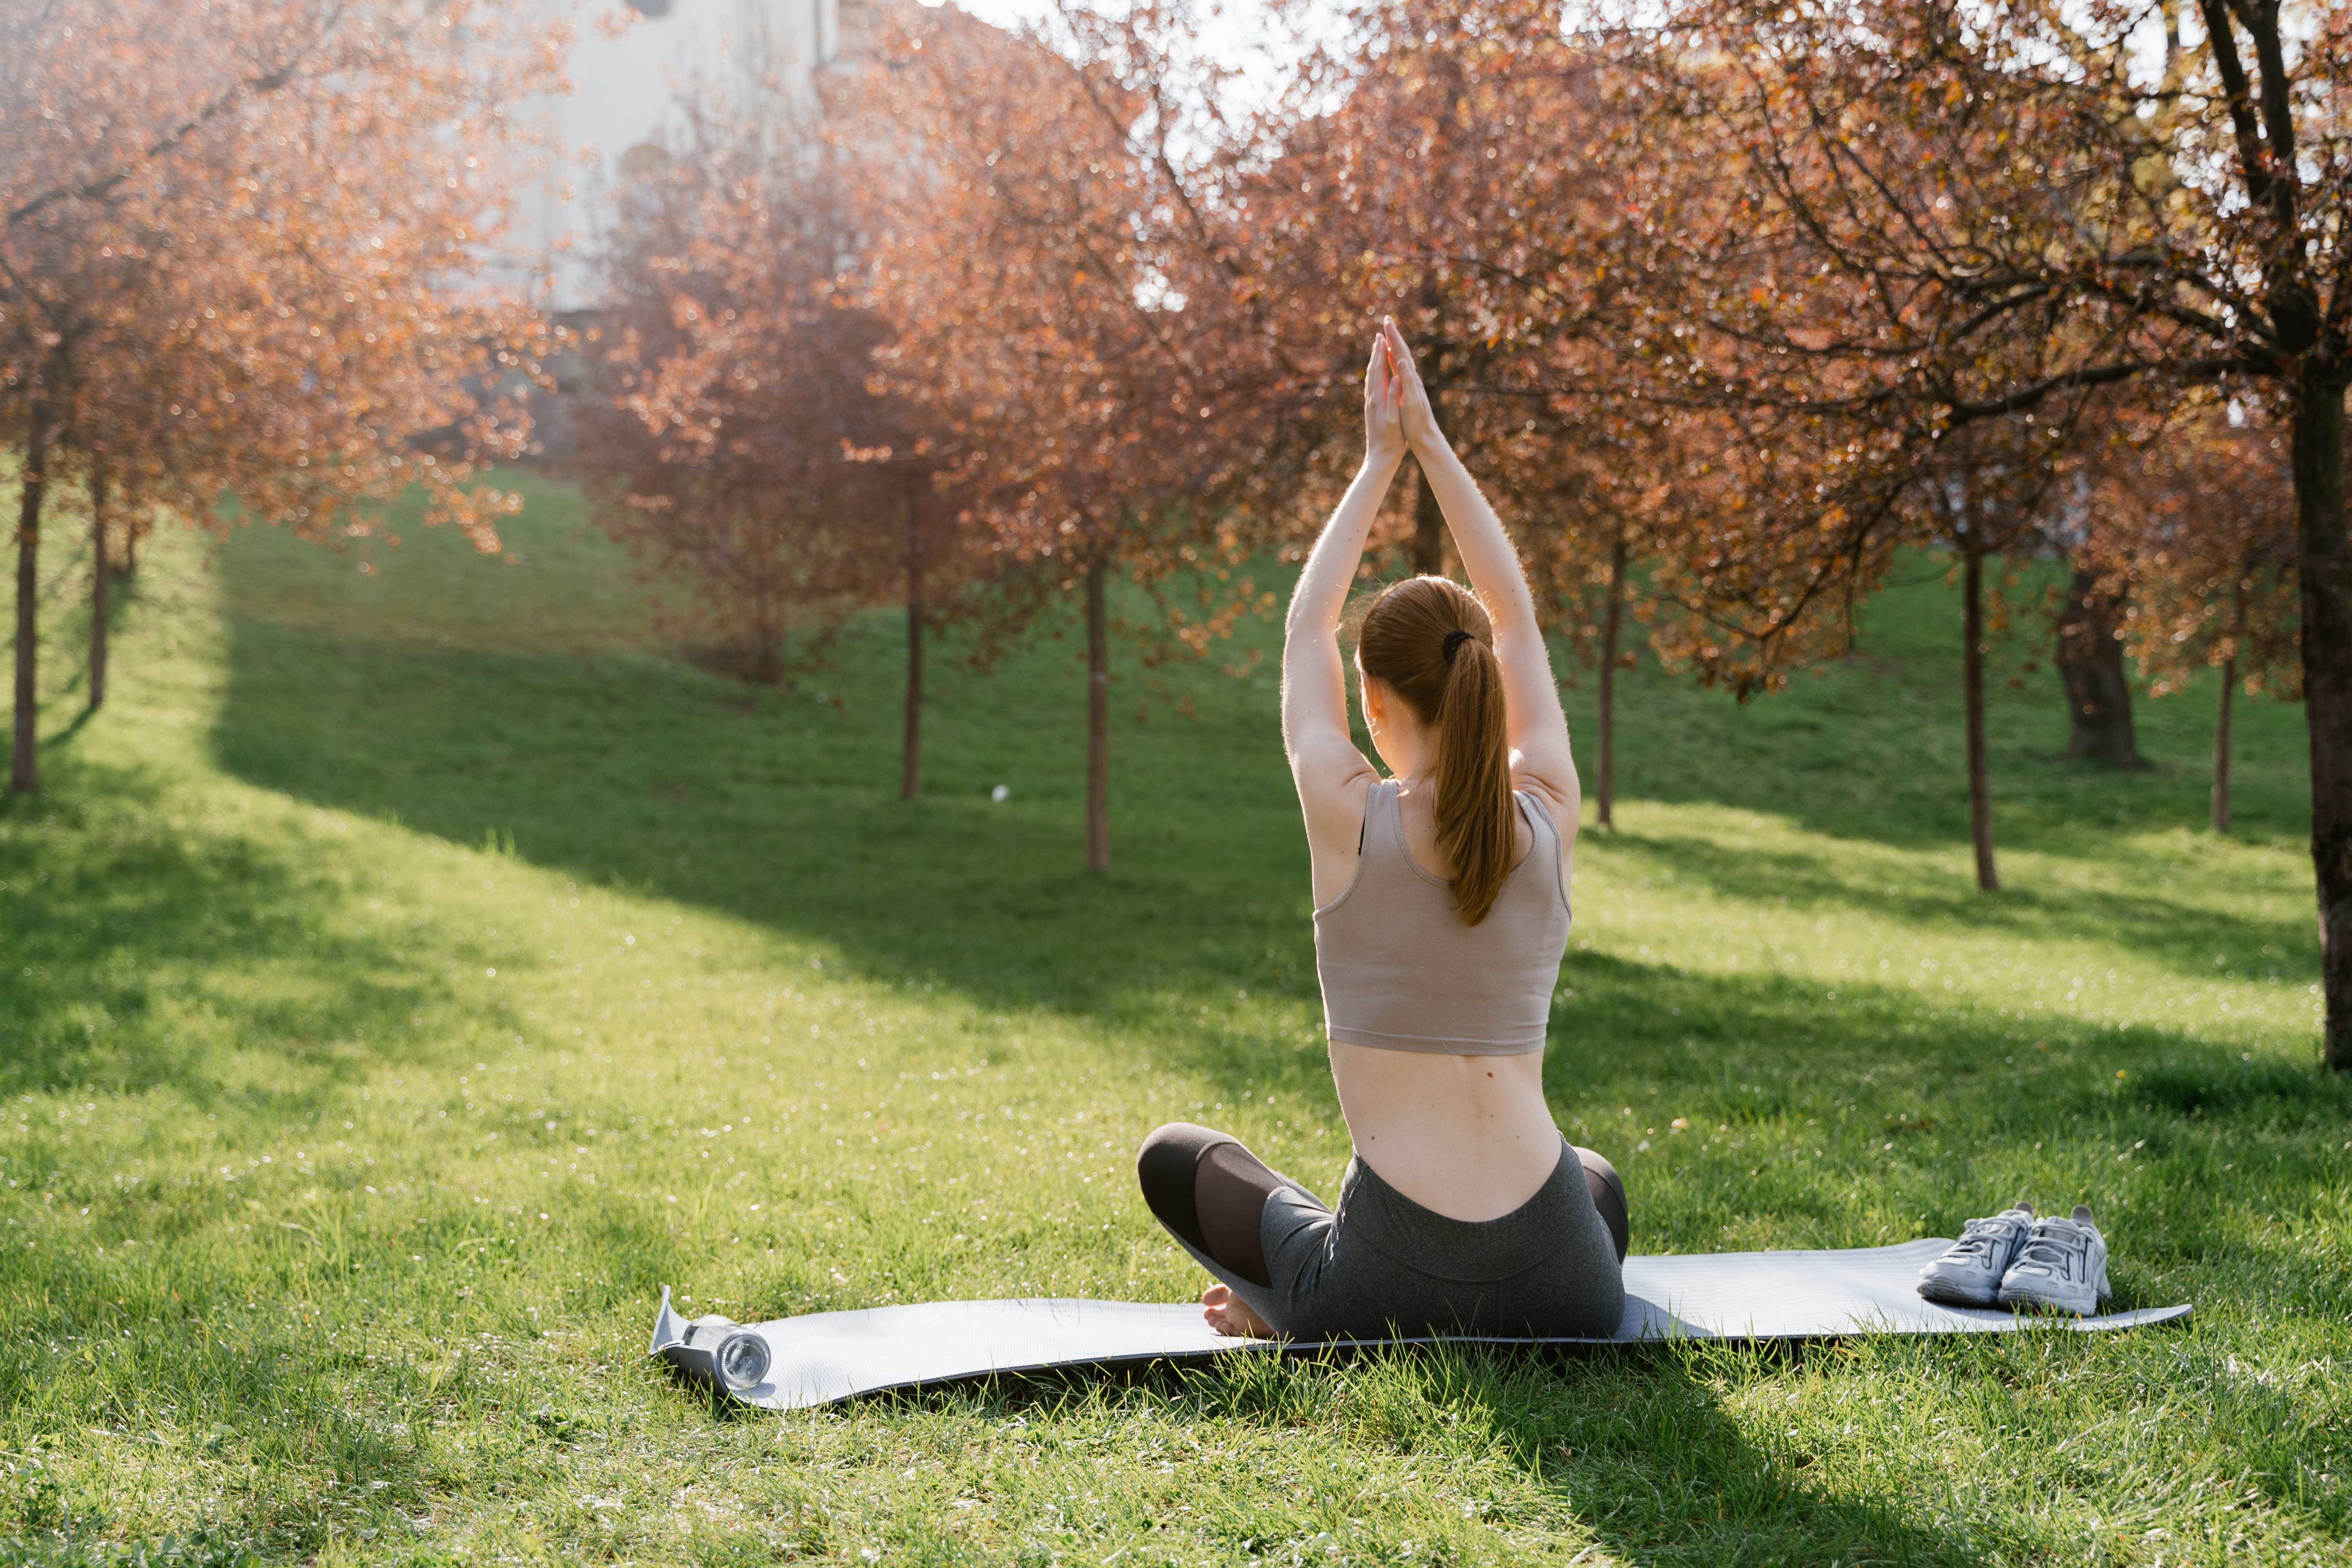 This photo demonstrates a woman doing yoga outdoors during autumn.